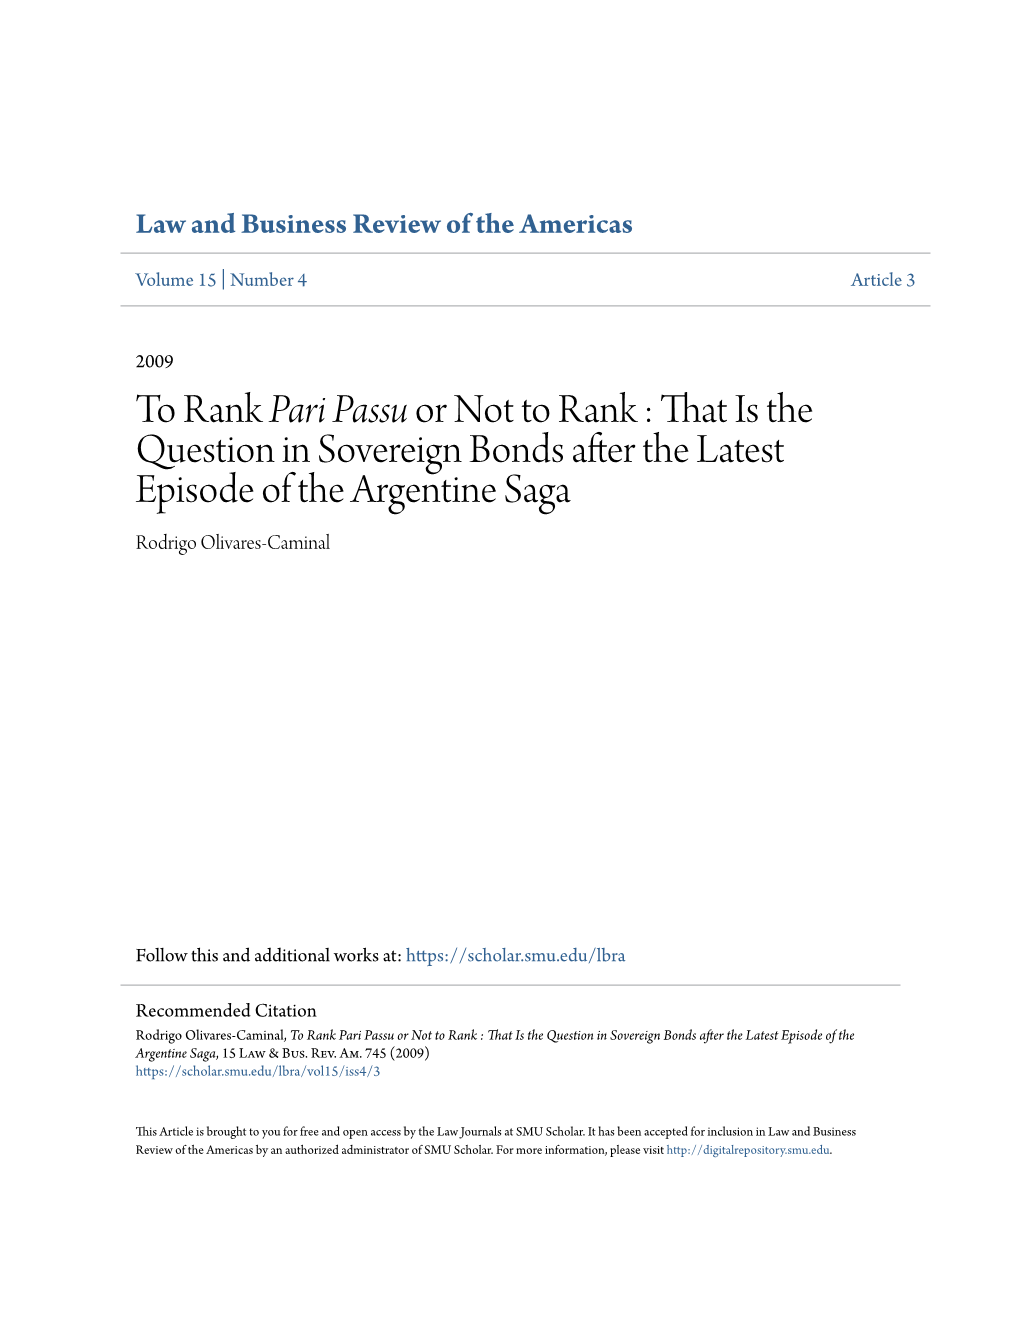 To Rank Pari Passu Or Not to Rank : That Is the Question in Sovereign Bonds After the Latest Episode of the Argentine Saga Rodrigo Olivares-Caminal